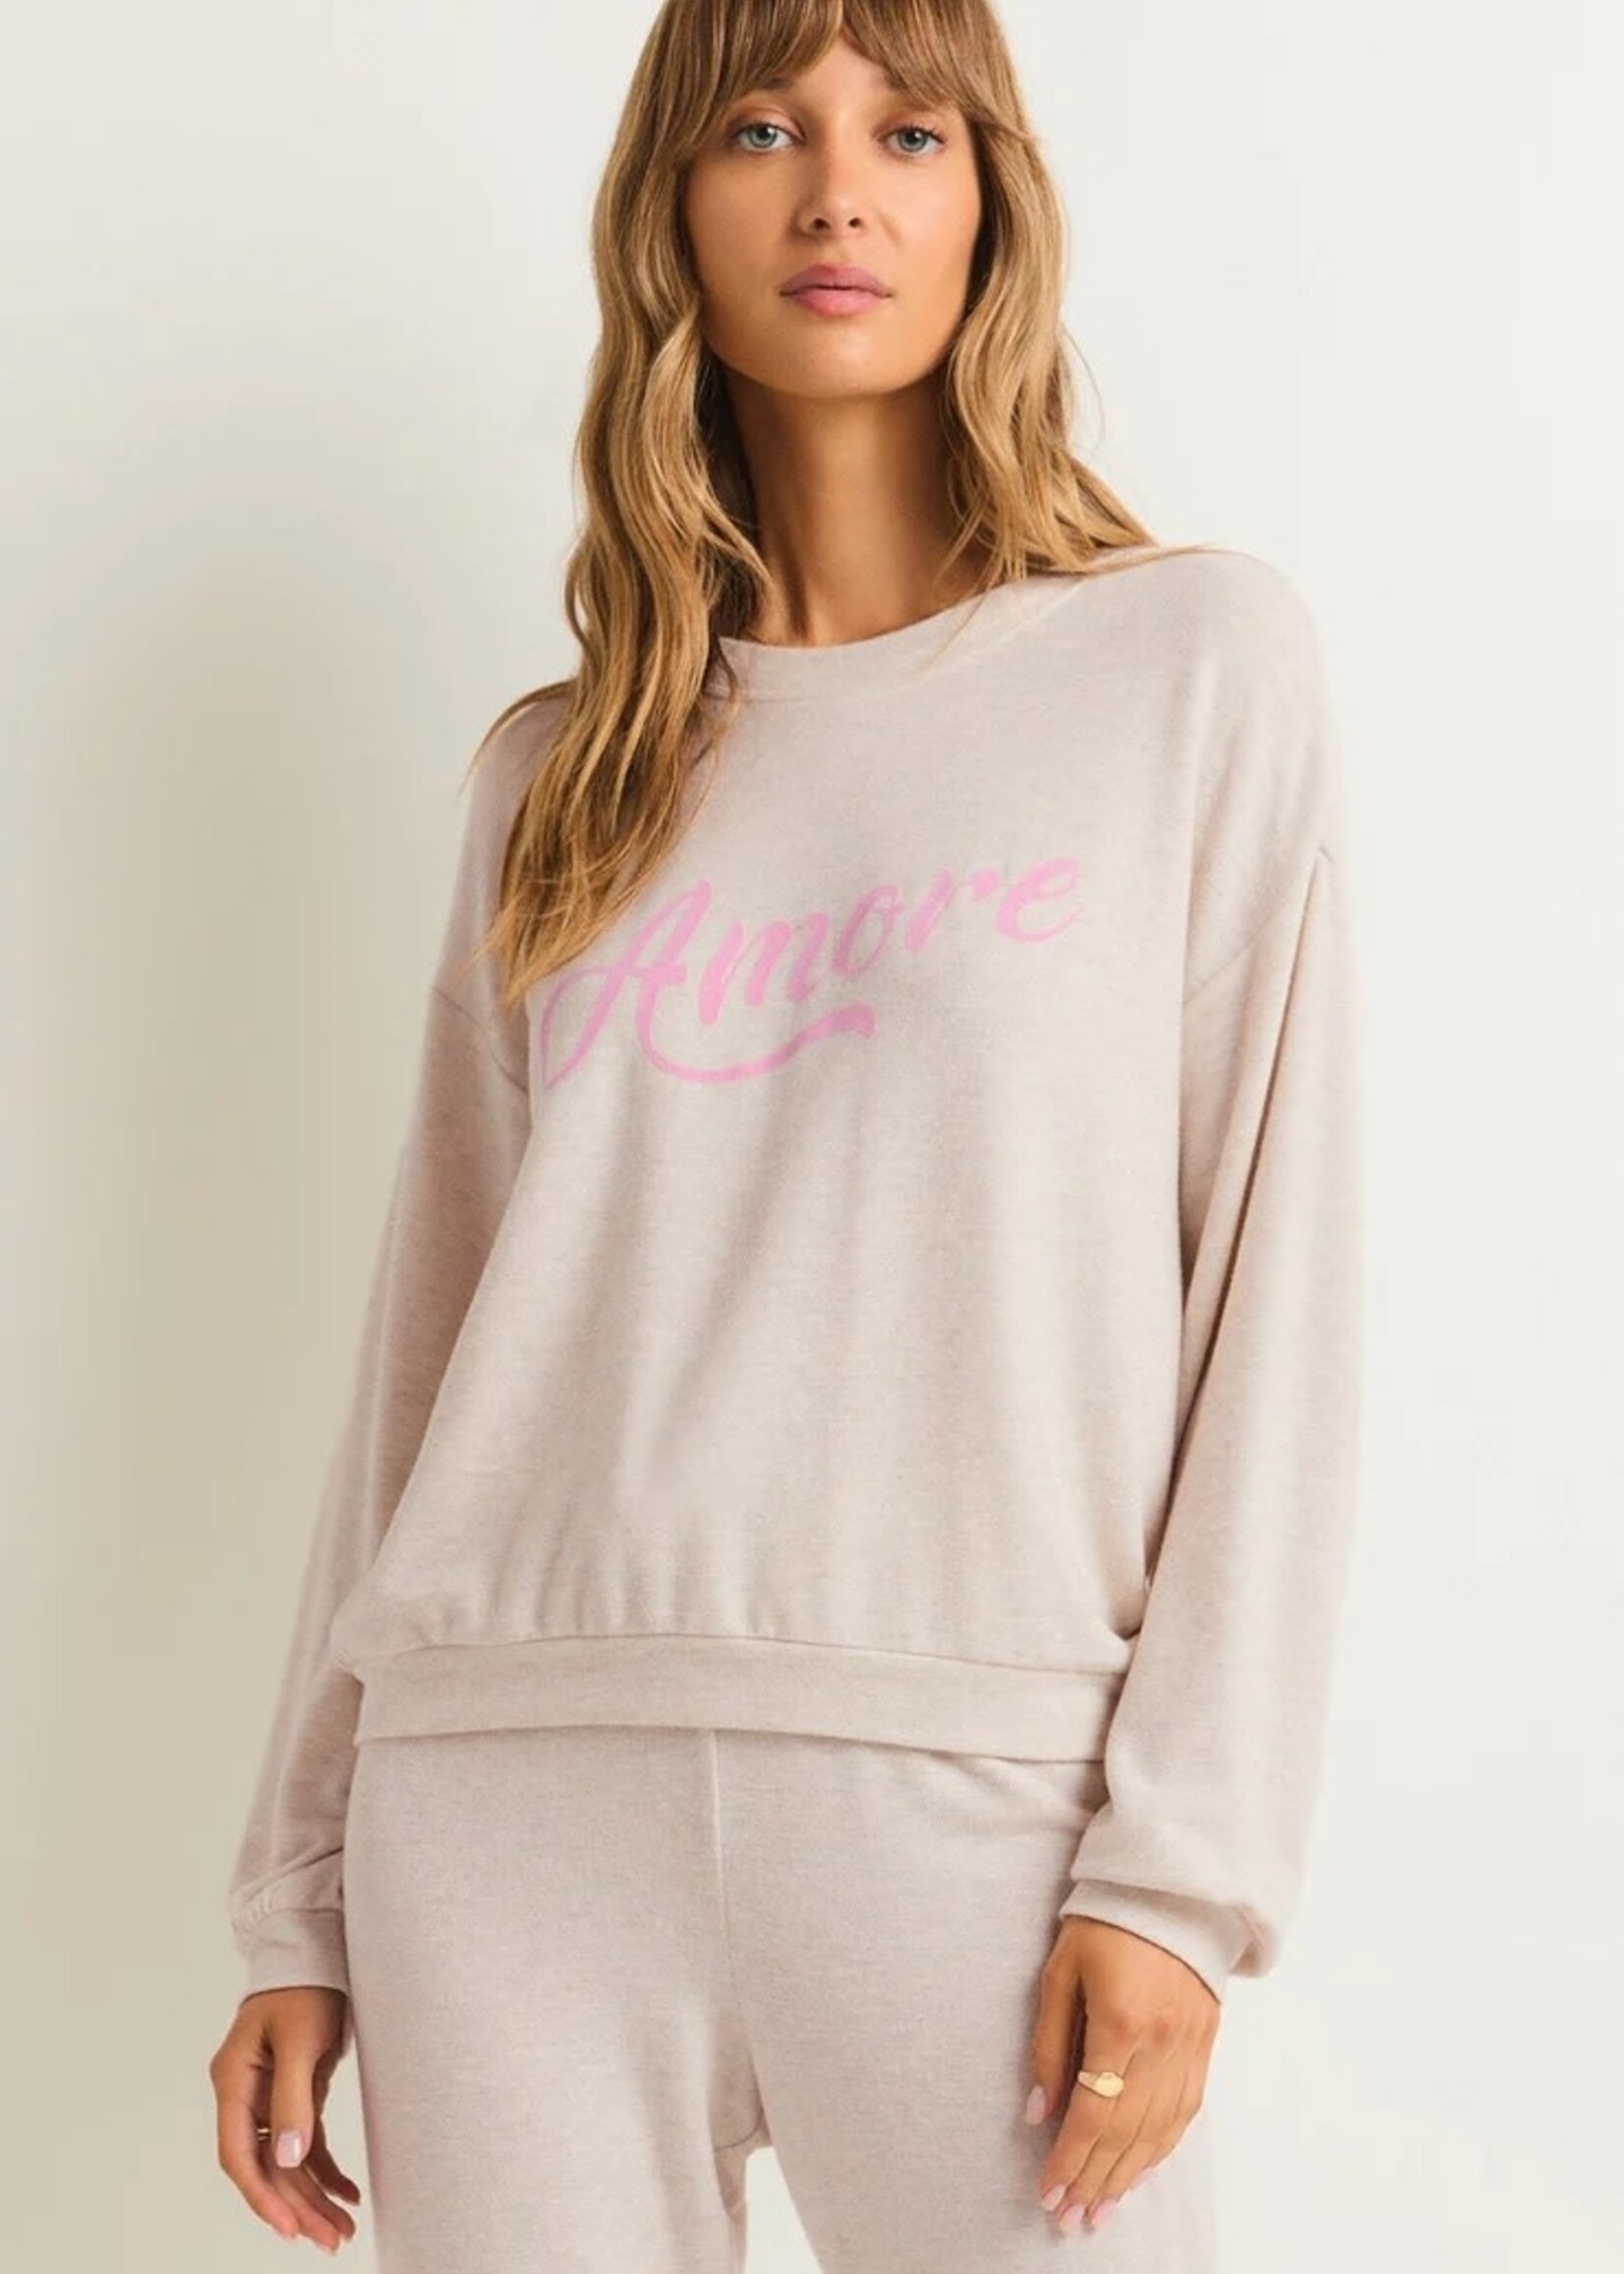 Z SUPPLY Amore Long Sleeve Top